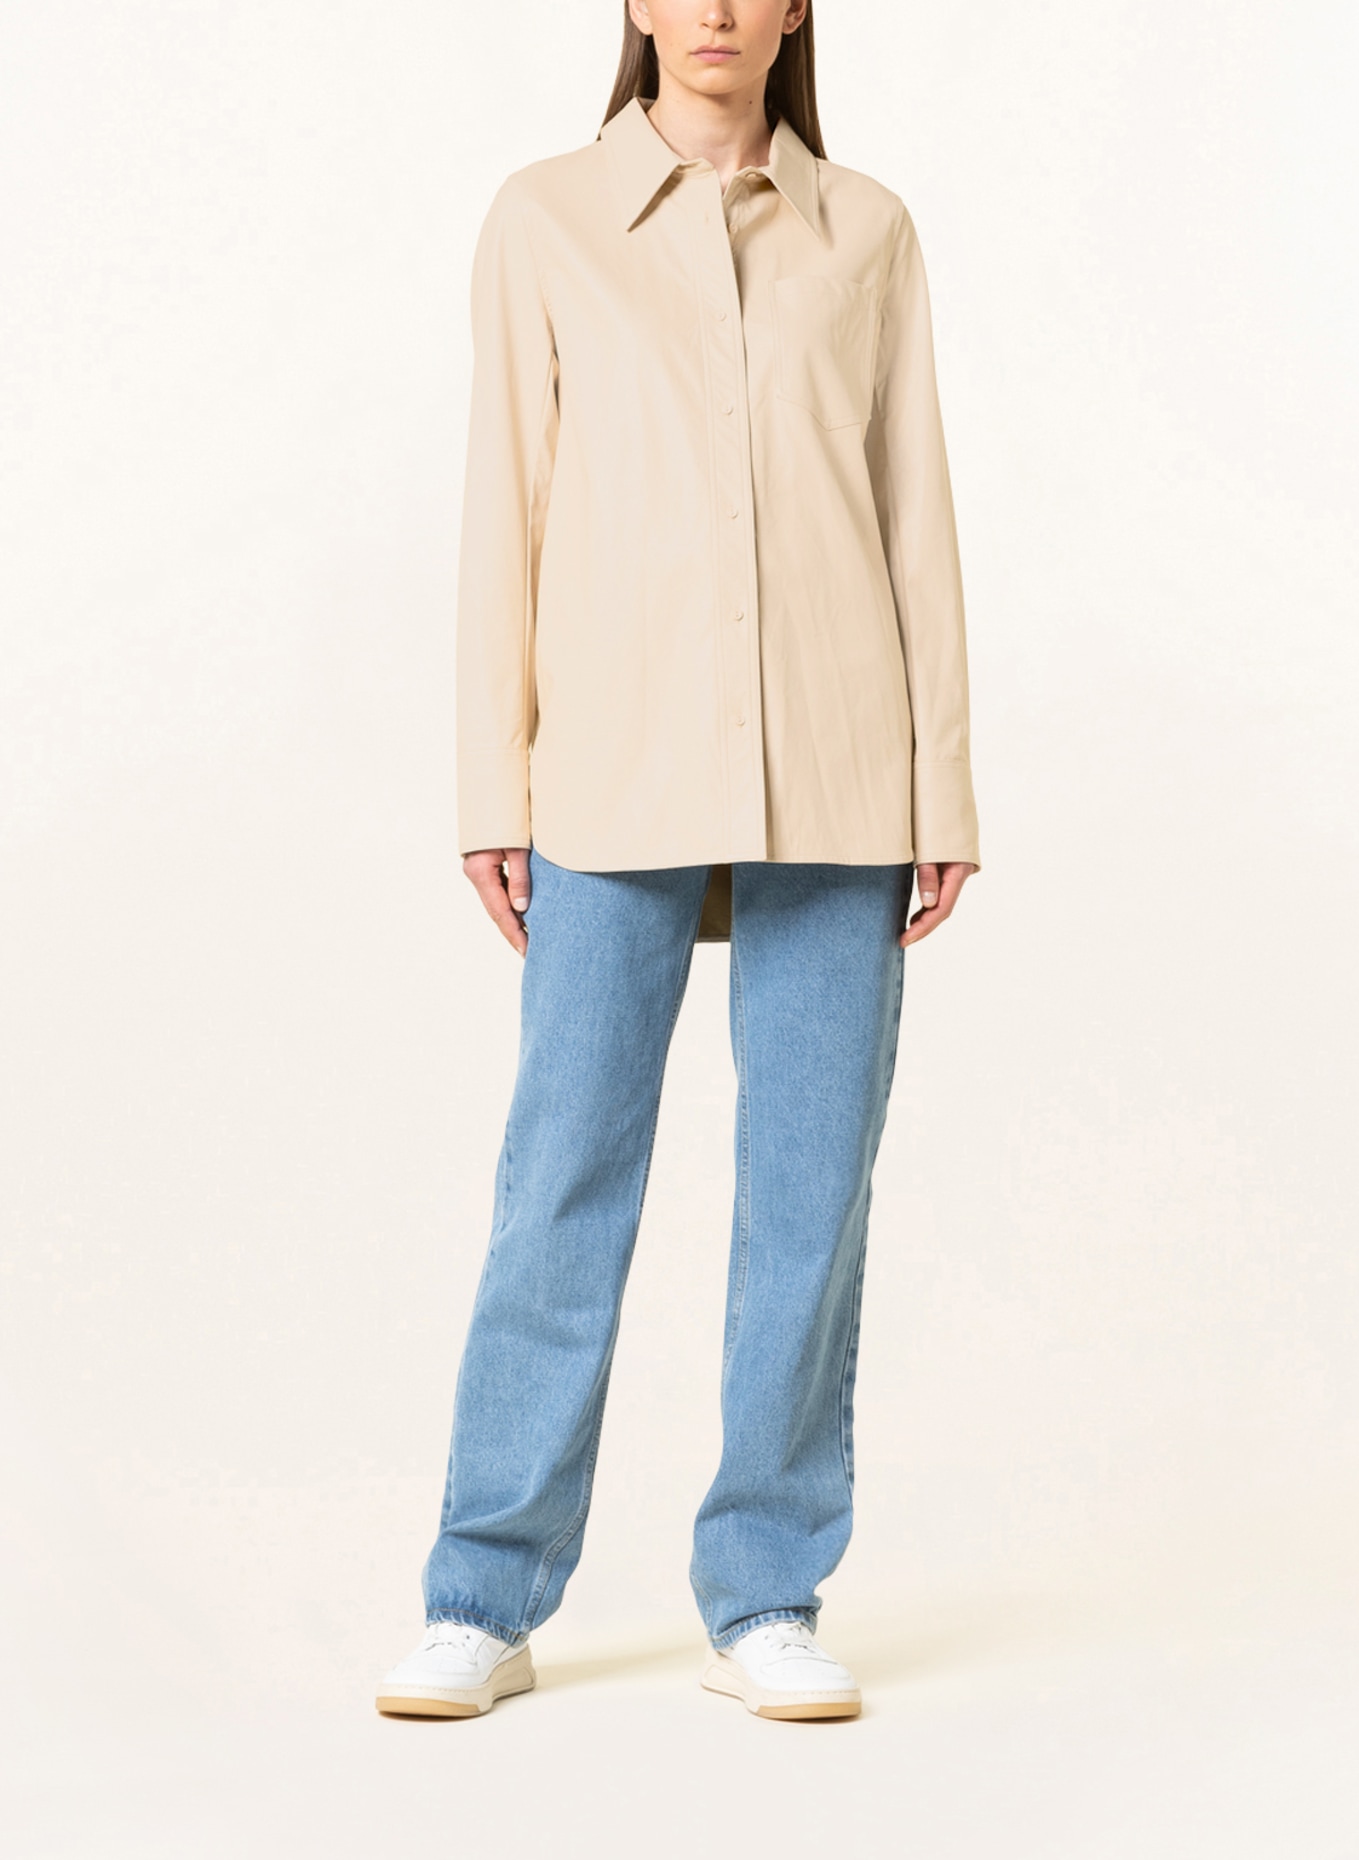 STAND STUDIO Shirt blouse MARITA in leather look, Color: BEIGE (Image 2)